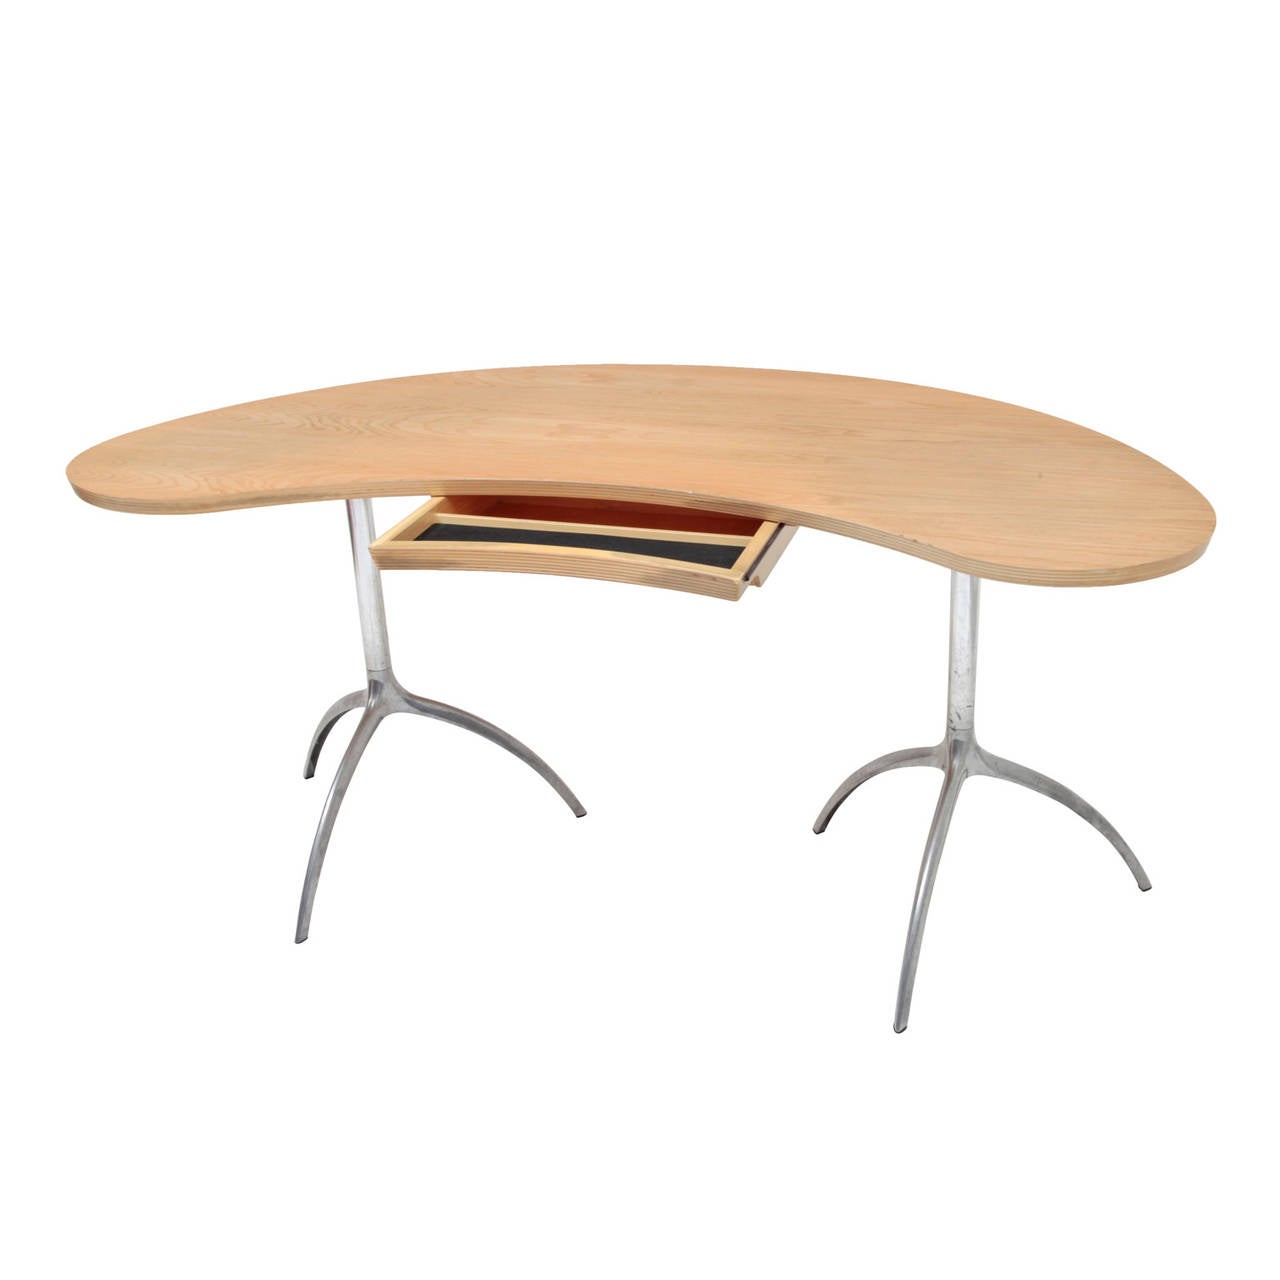 The table has a kidney-shaped table top with a small drawer and stands on two thin legs with a conical shaft and a tripod stand.